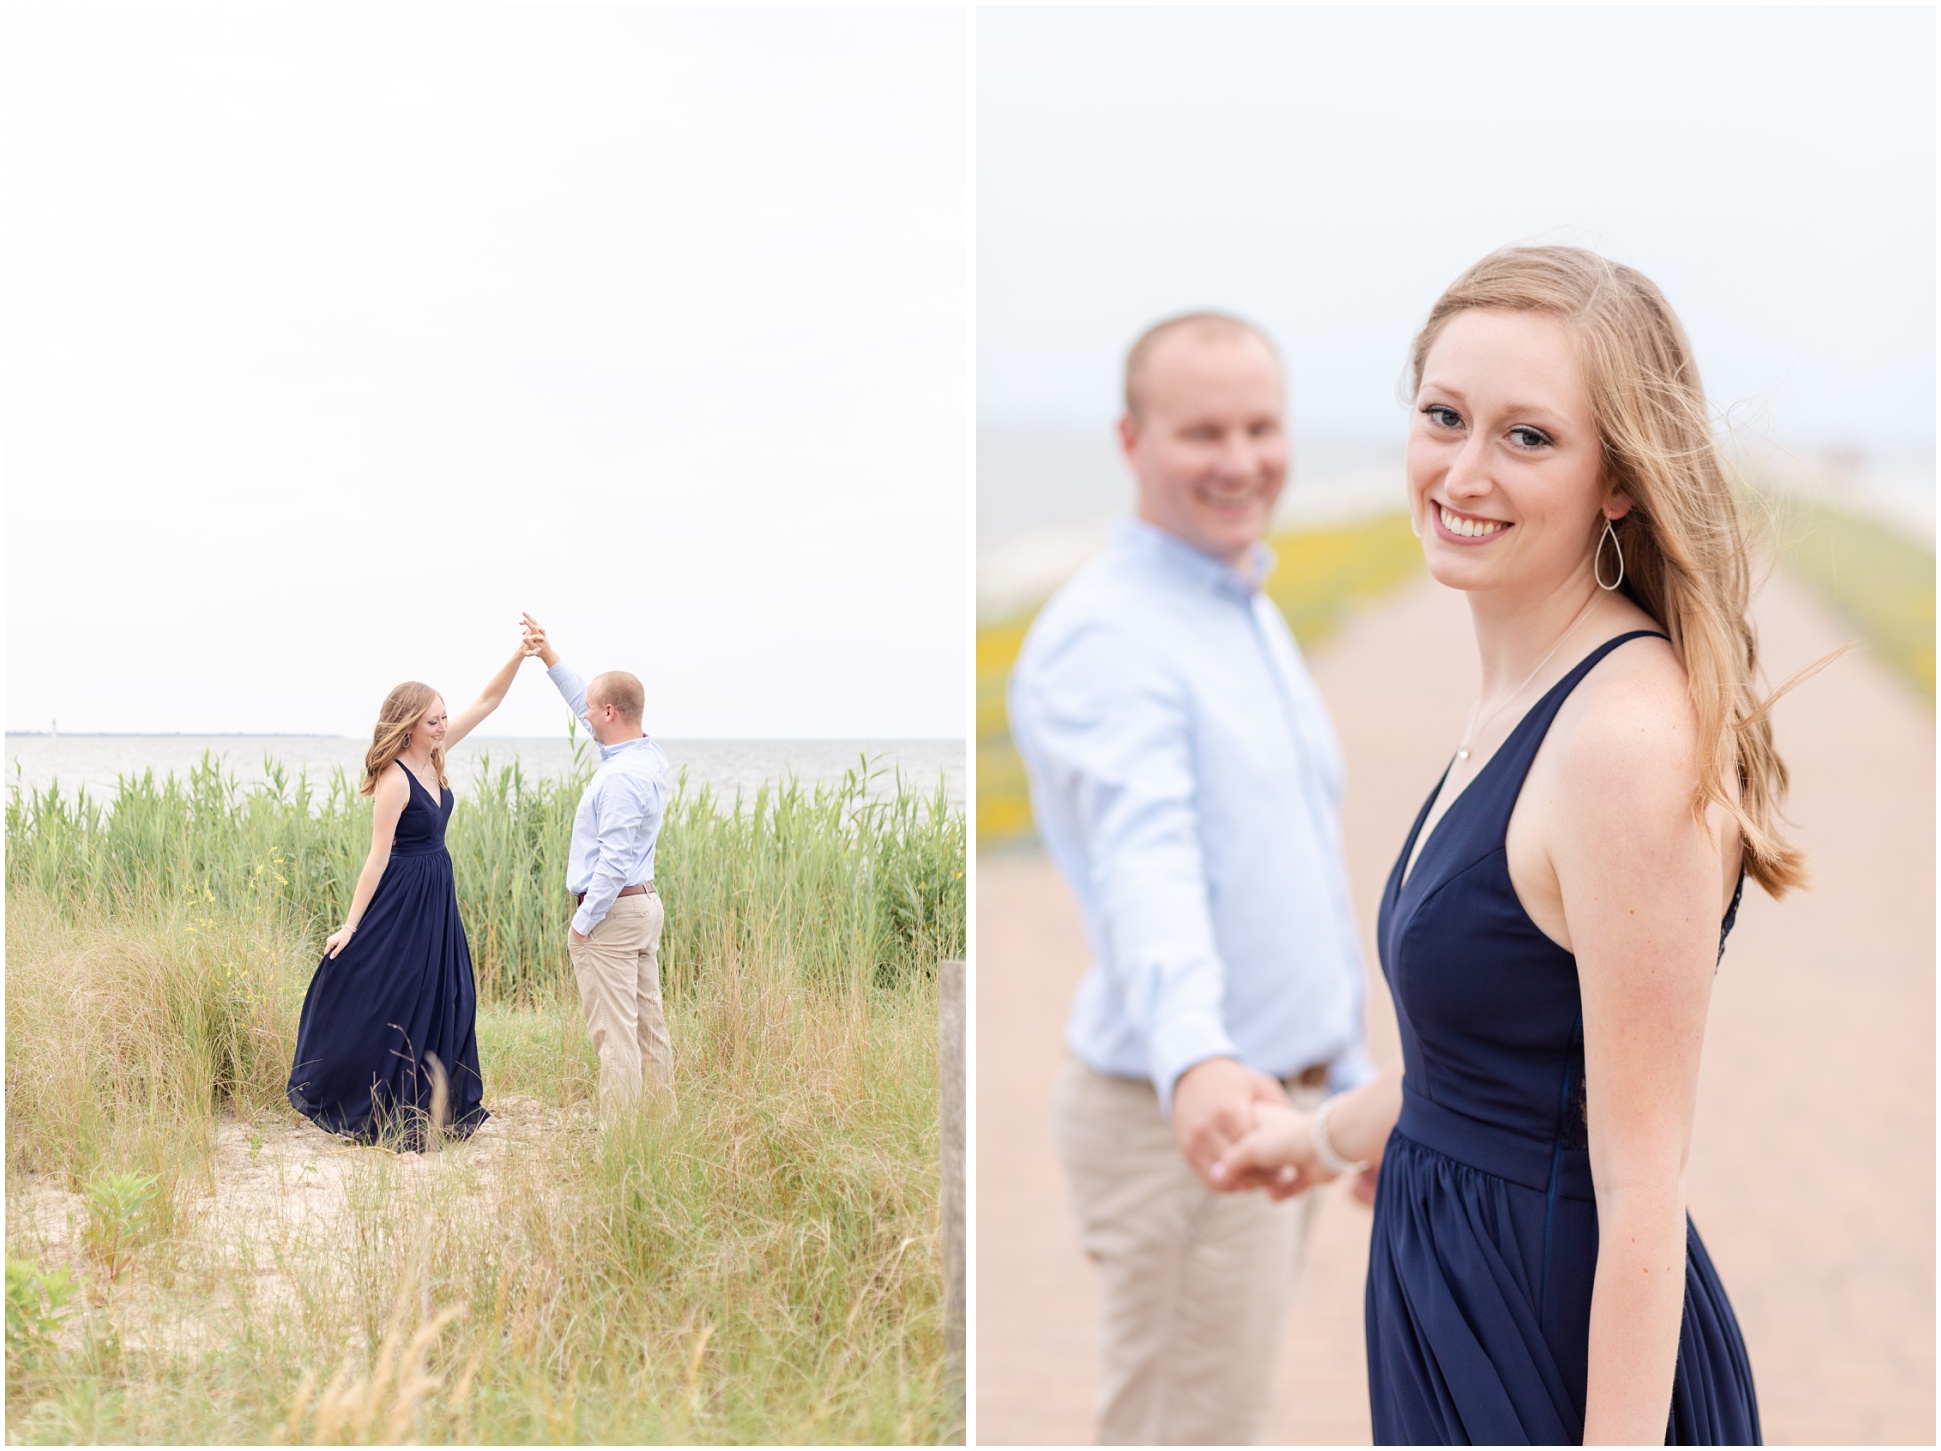 Left Image: Engagement Session, Bride and Groom Twirling in the tall grasses by the water